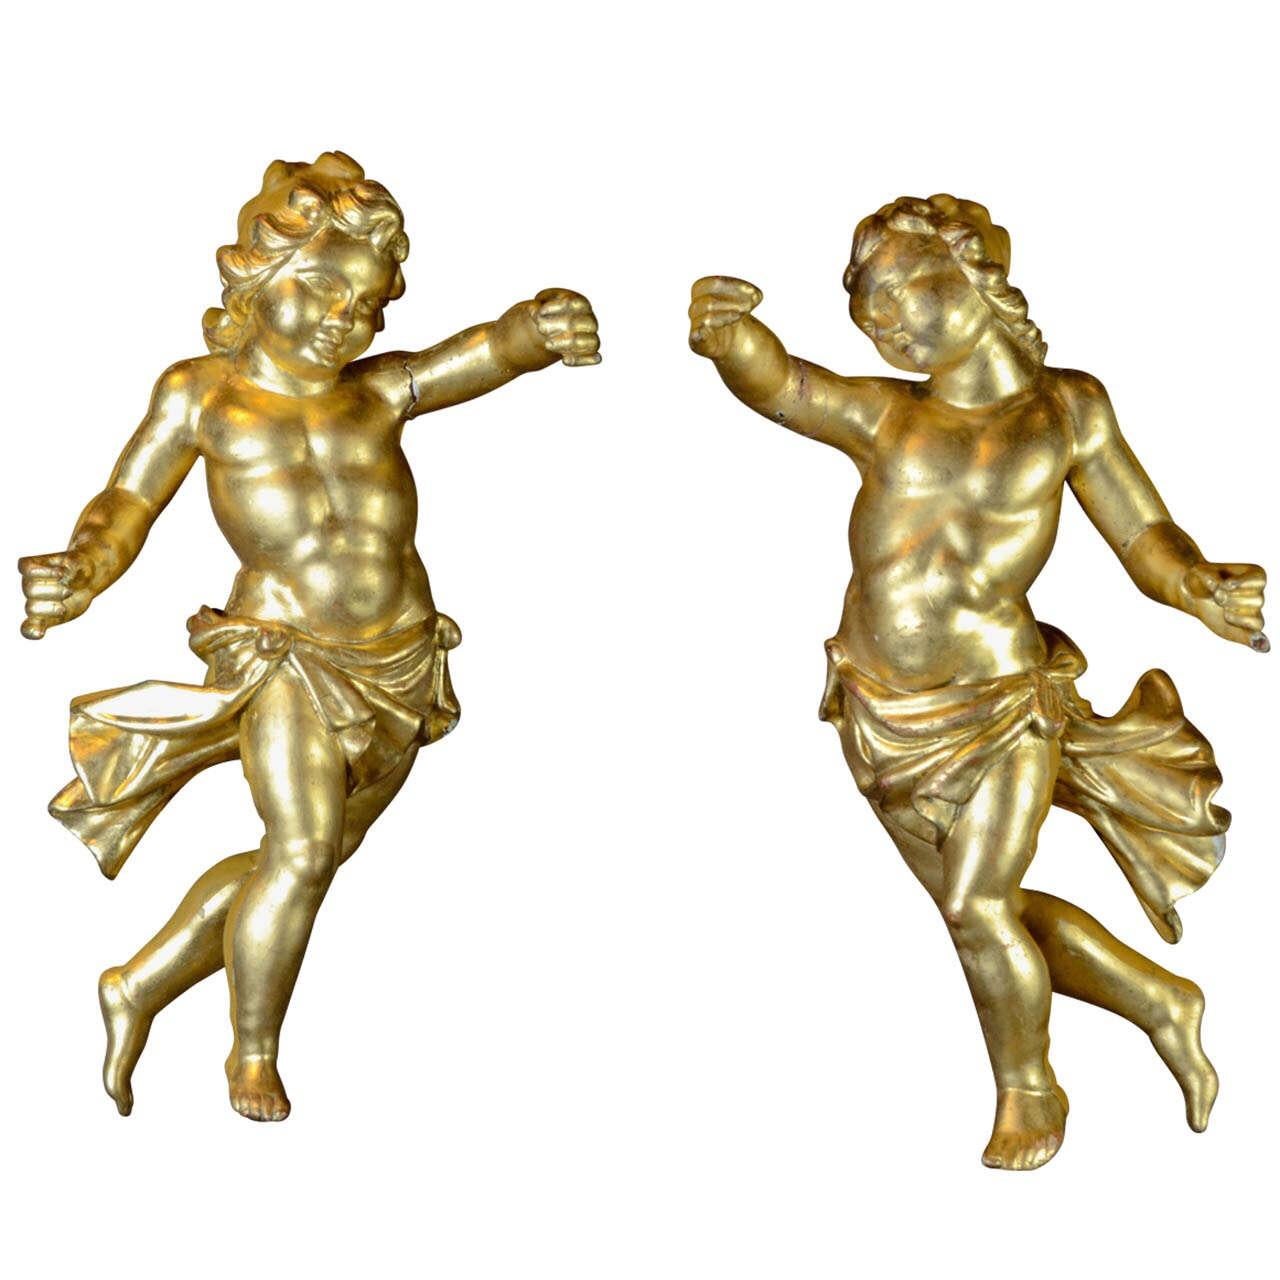 A rare and magnificent pair of ancient 18th century Italian sculptures depicting Baroque Putti. 
The style, quality and workmanship of this pair of winged angels in gilded wood with gold leaf, suggest a noble production in central Italy, most likely